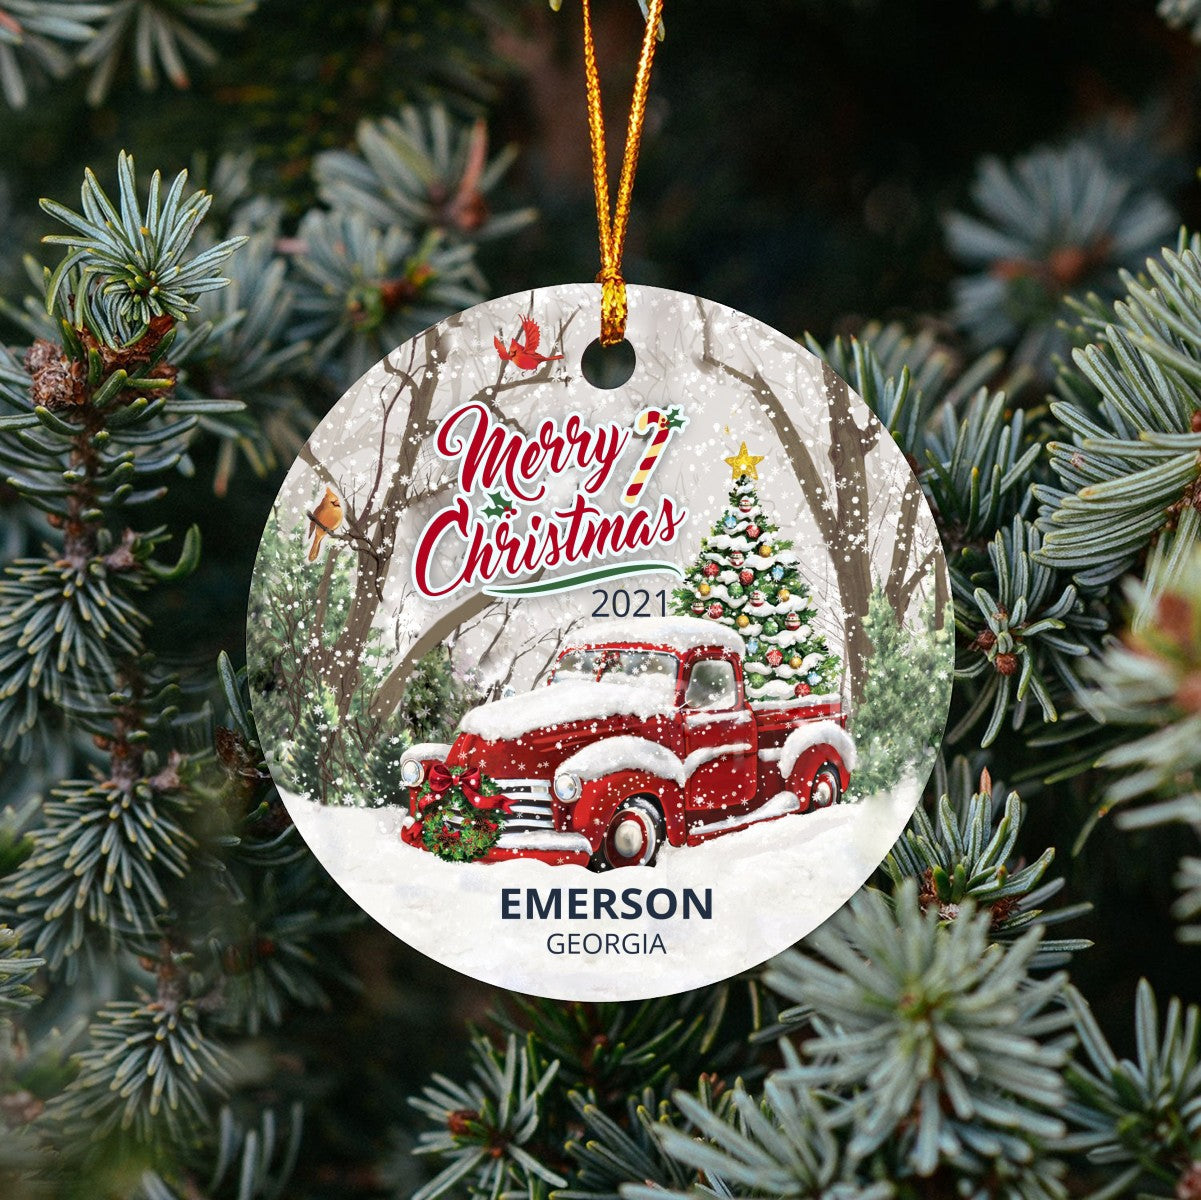 Christmas Tree Ornaments Emerson - Ornament With Name City, State Emerson Georgia GA Ornament - Red Truck Xmas Ornaments 3'' Plastic Gift For Family, Friend And Housewarming